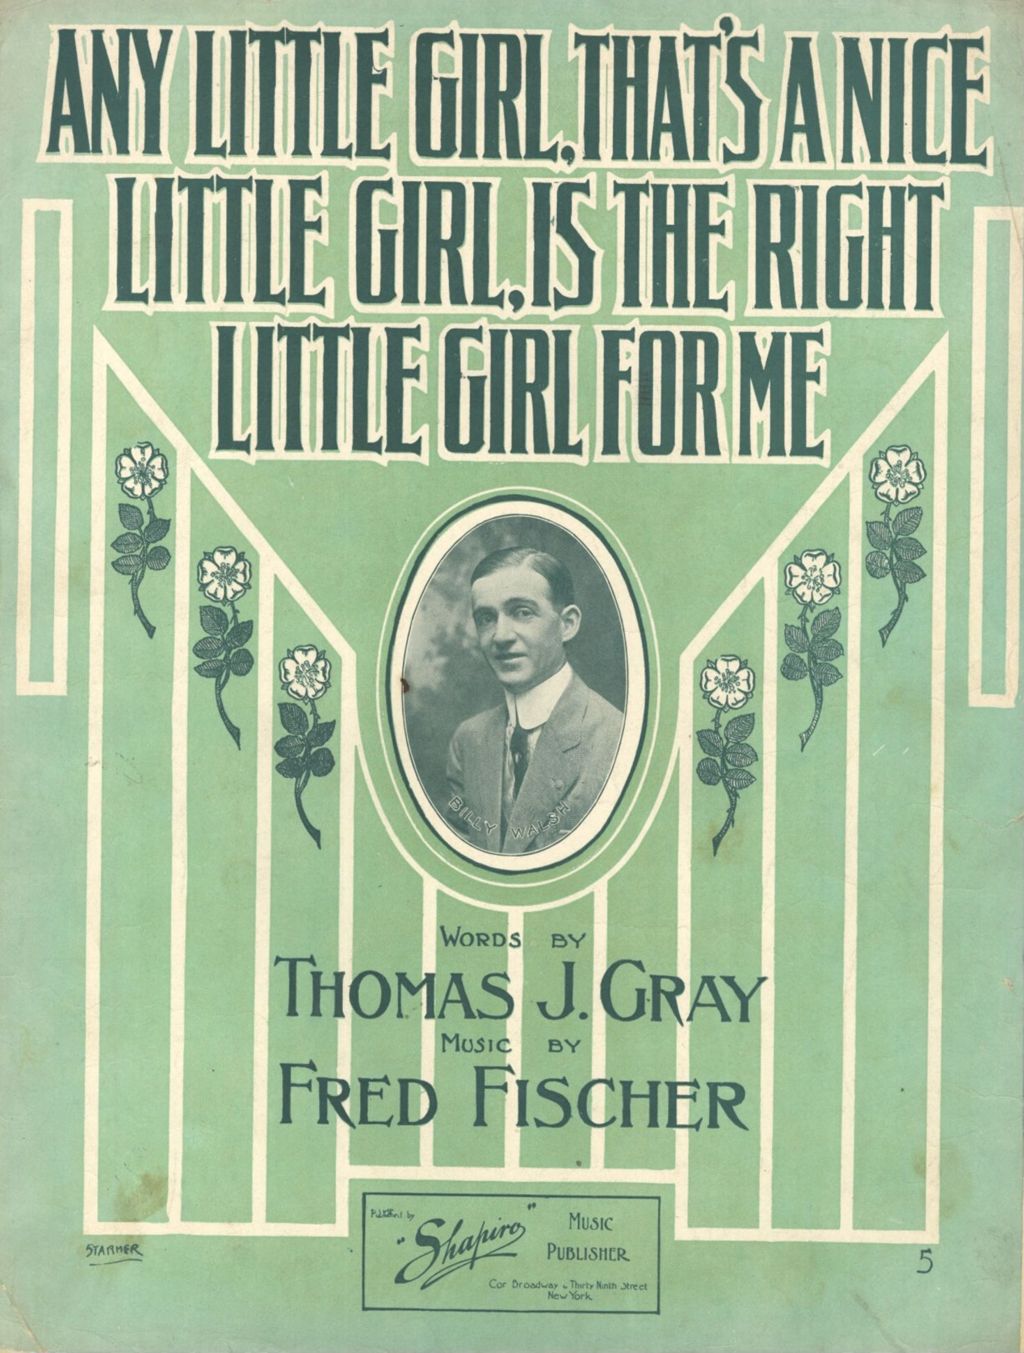 Any Little Girl, That's A Nice Little Girl, Is The Right Little Girl For Me